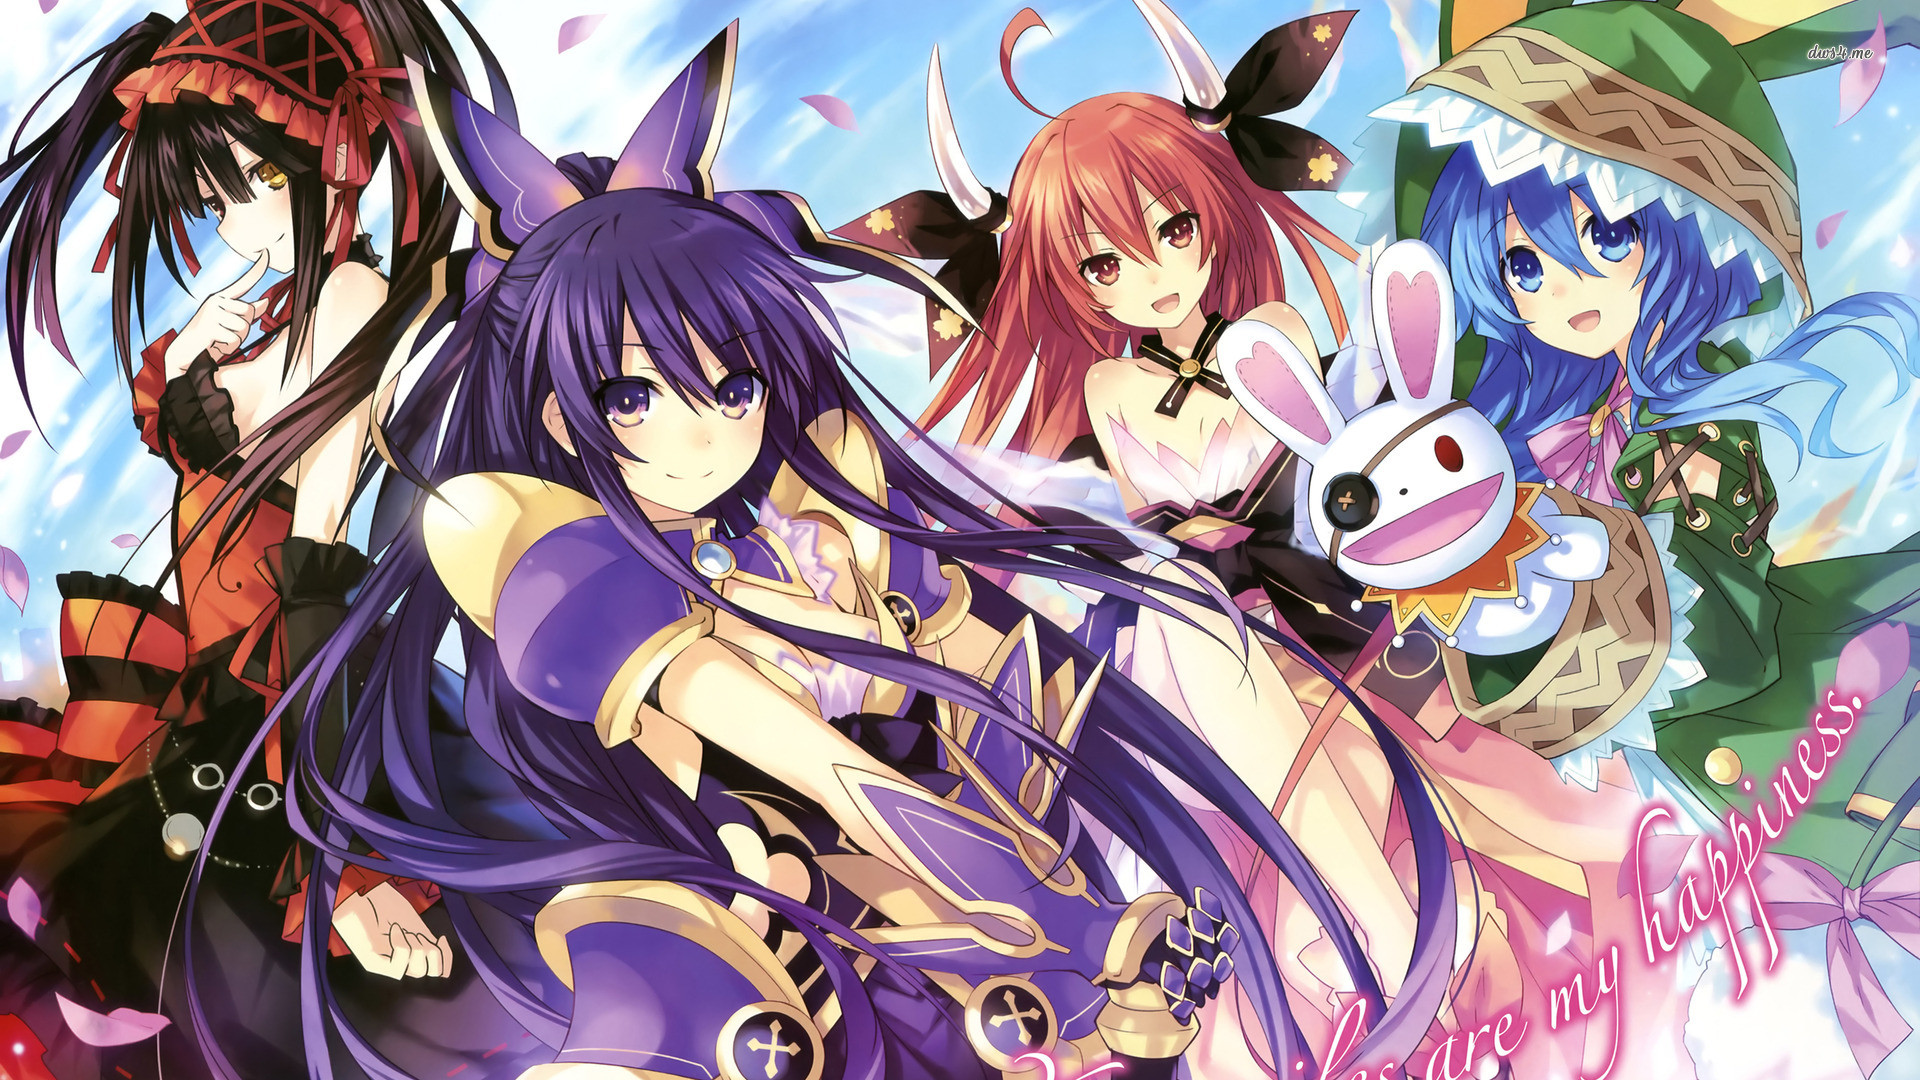 Date a Live wallpaper – Anime wallpapers – #18563